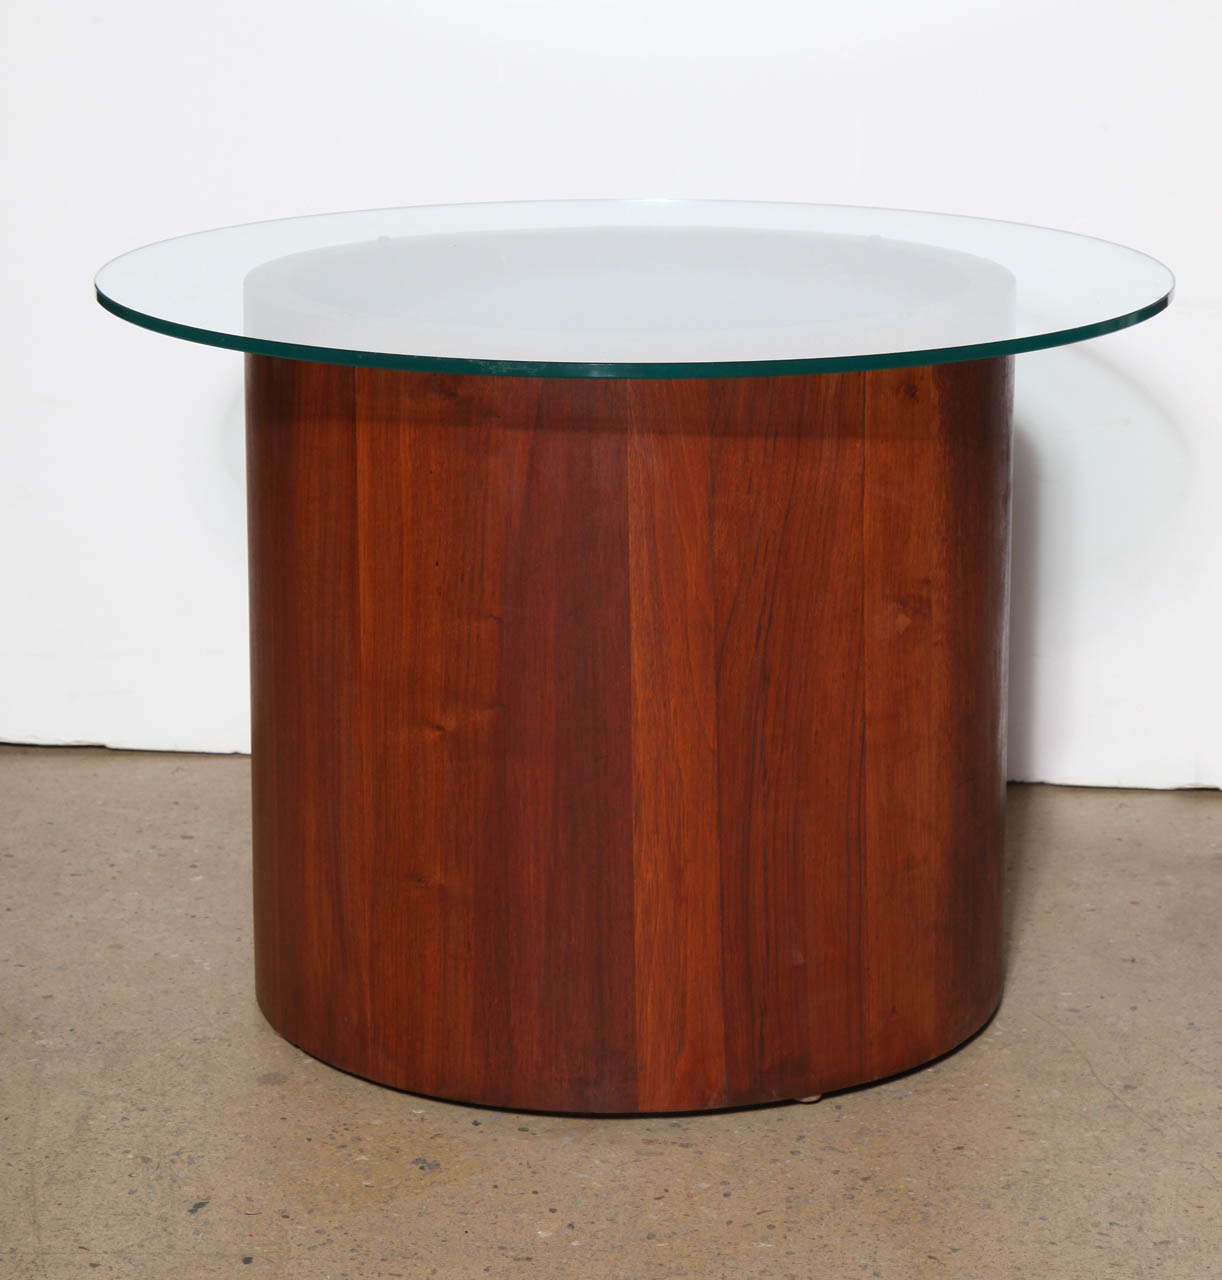 American Mid Century Modern Solid Teak Coffee Table with circular Glass top by Lane Furniture. Featuring a laminated, beautifully grained, 1 inch diameter solid Teak round base, with original 3/8 round glass top. The thick cylindrical Teak base